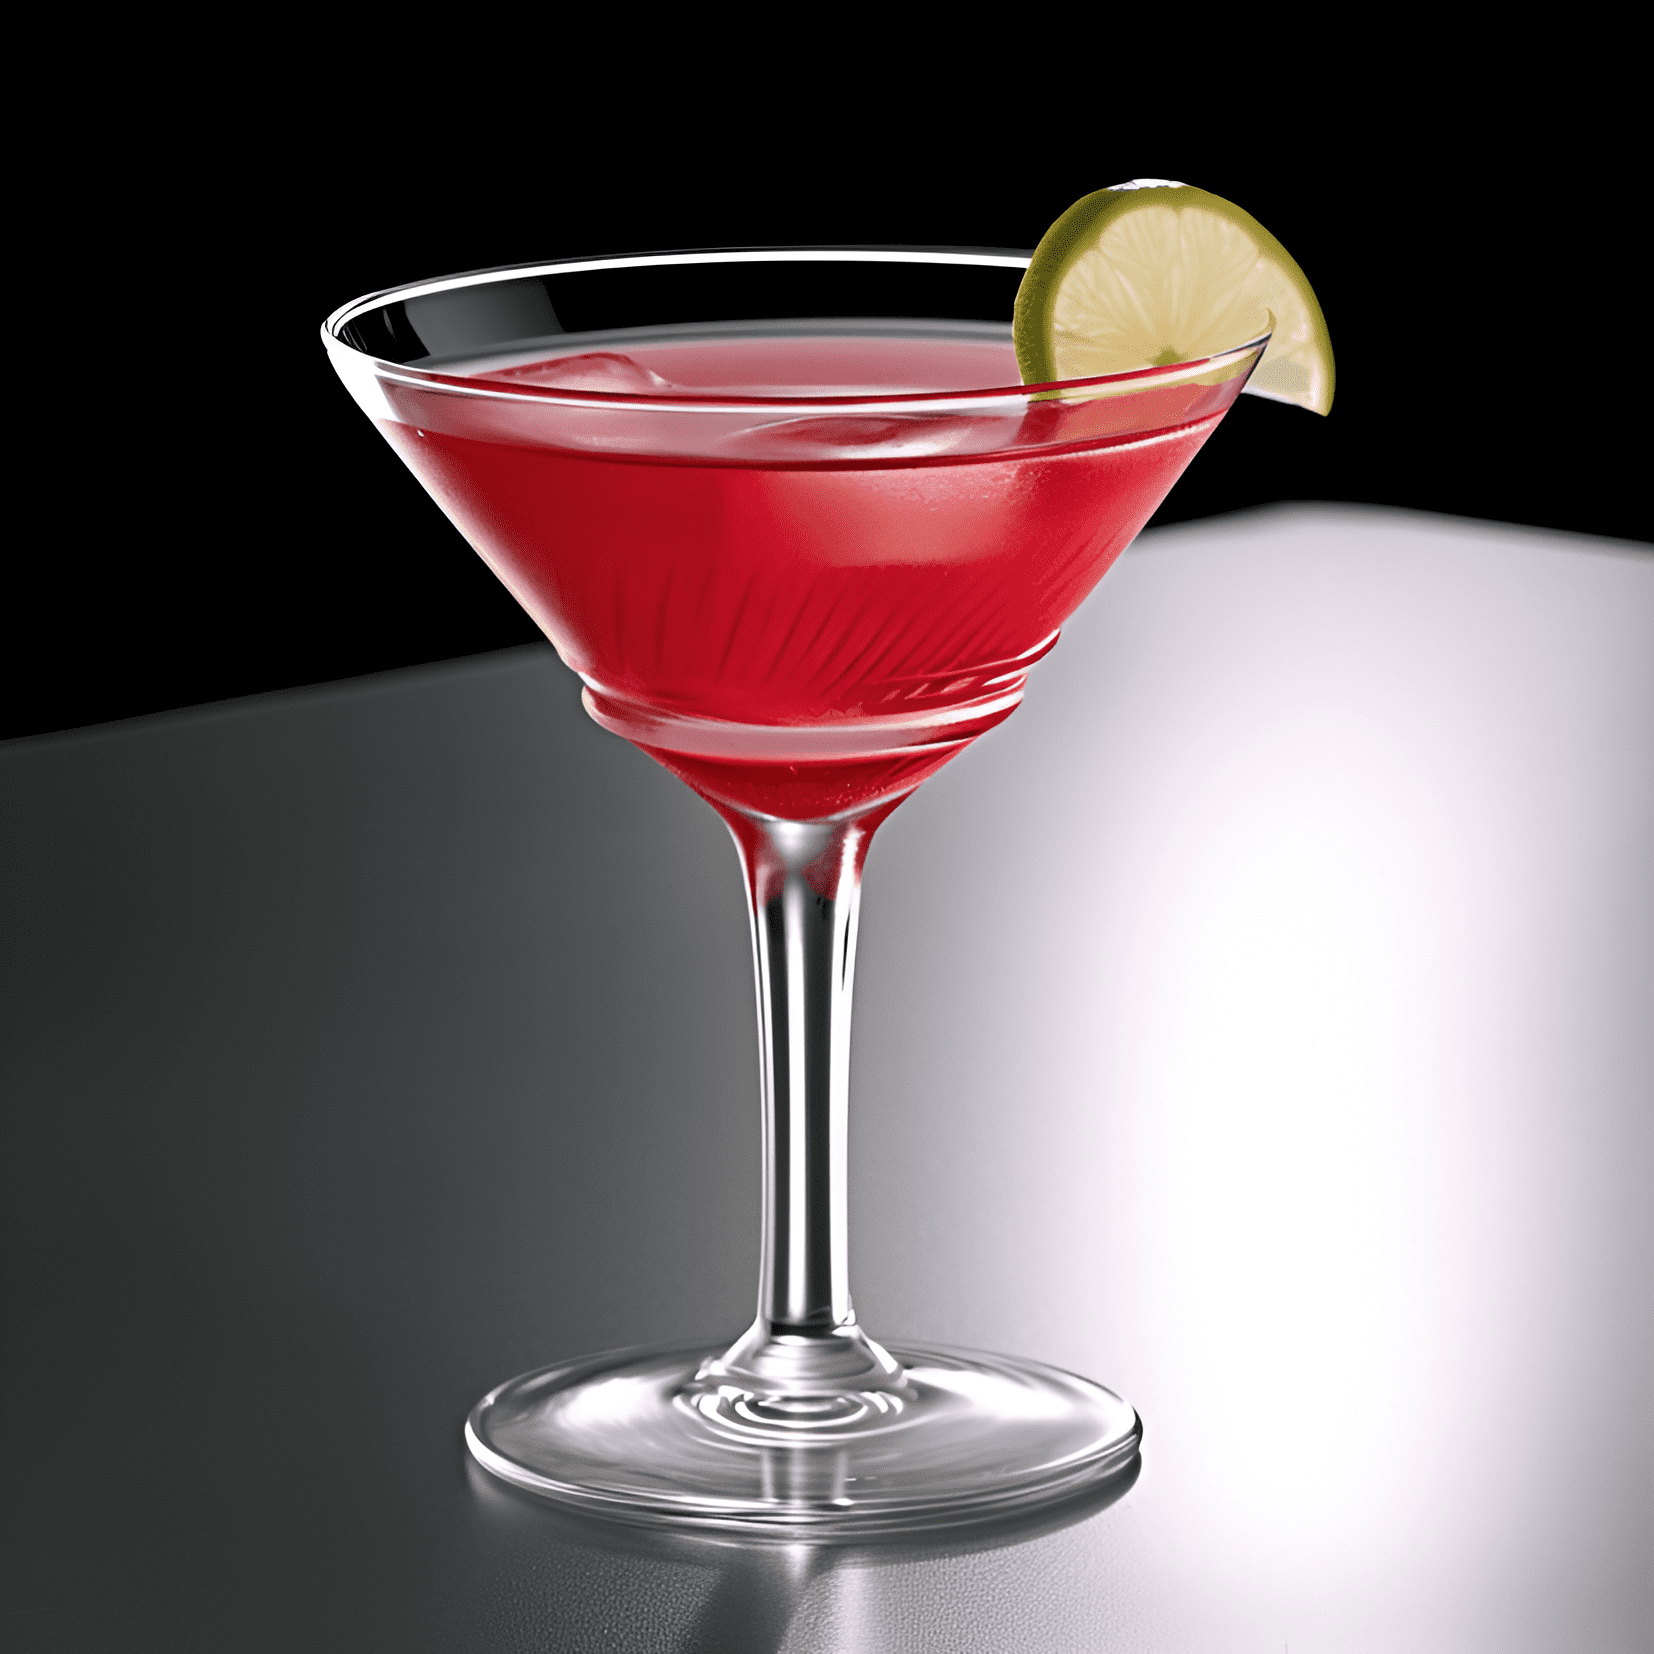 Bacardi Cocktail Recipe - The Bacardi Cocktail has a fruity, sweet, and slightly tart taste. It is well-balanced, with the sweetness of the grenadine and the sourness of the lime juice complementing the smooth, light flavor of the Bacardi rum.